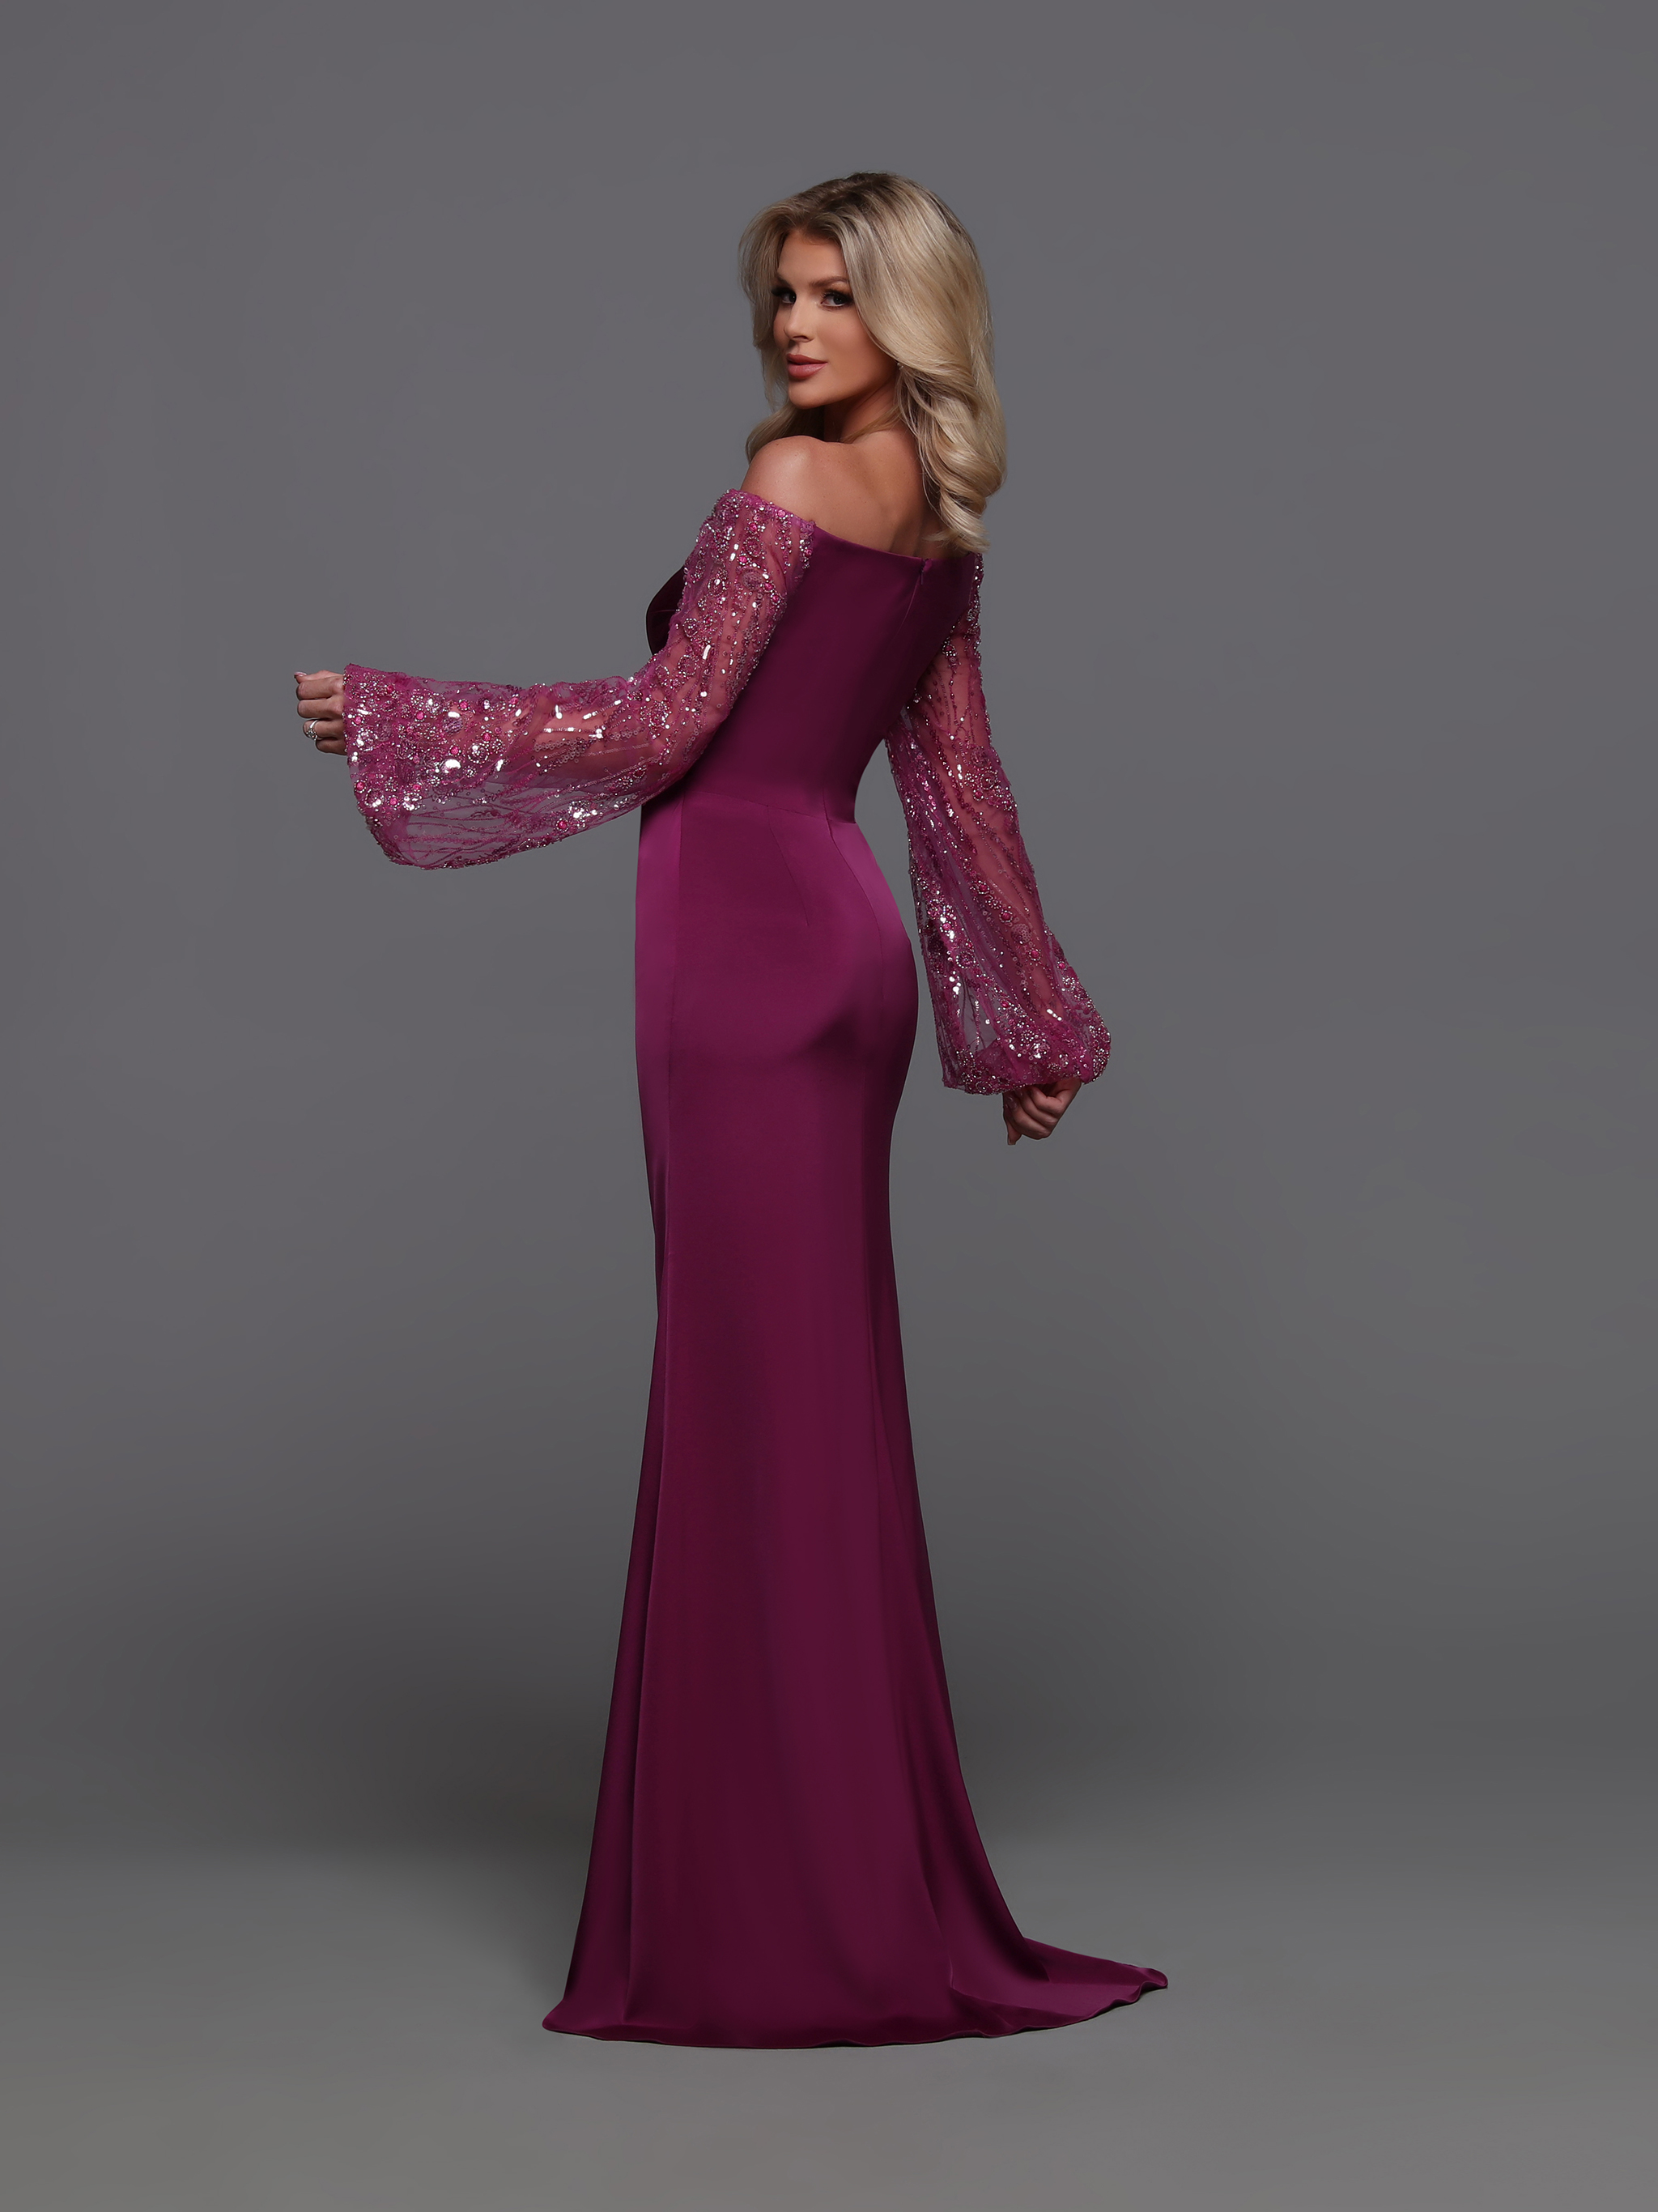 Image showing back view of style #60687